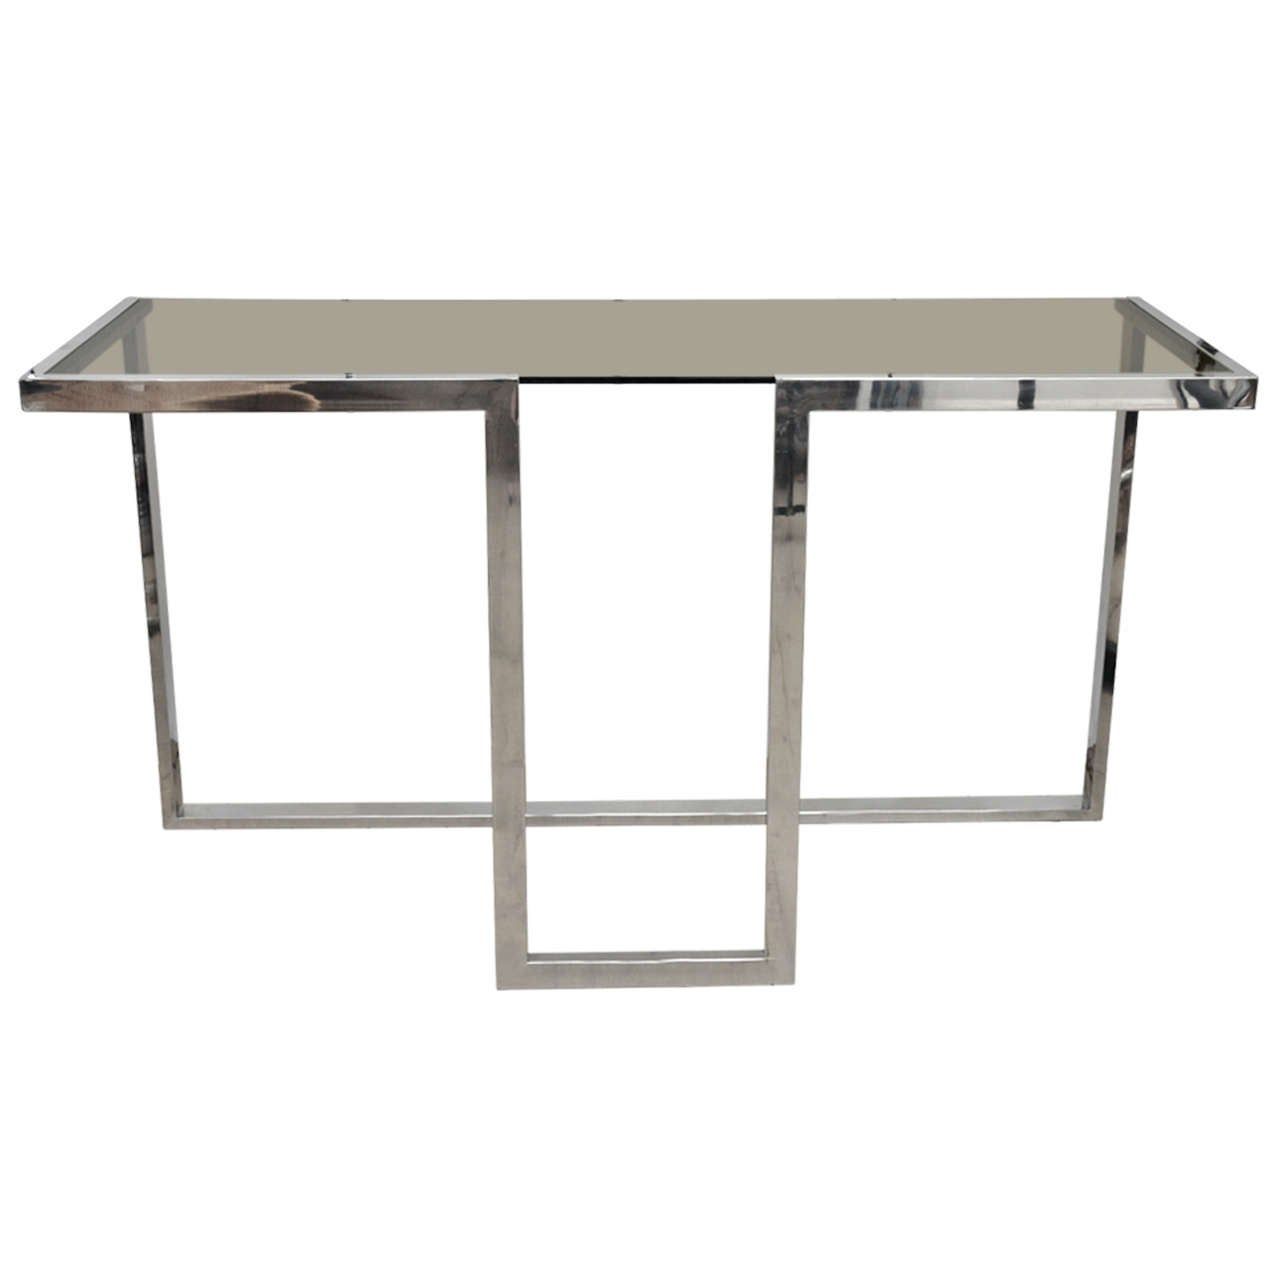 Smoked Glass Chromed Console Table At 1stdibs Intended For Brass Smoked Glass Console Tables (View 12 of 20)